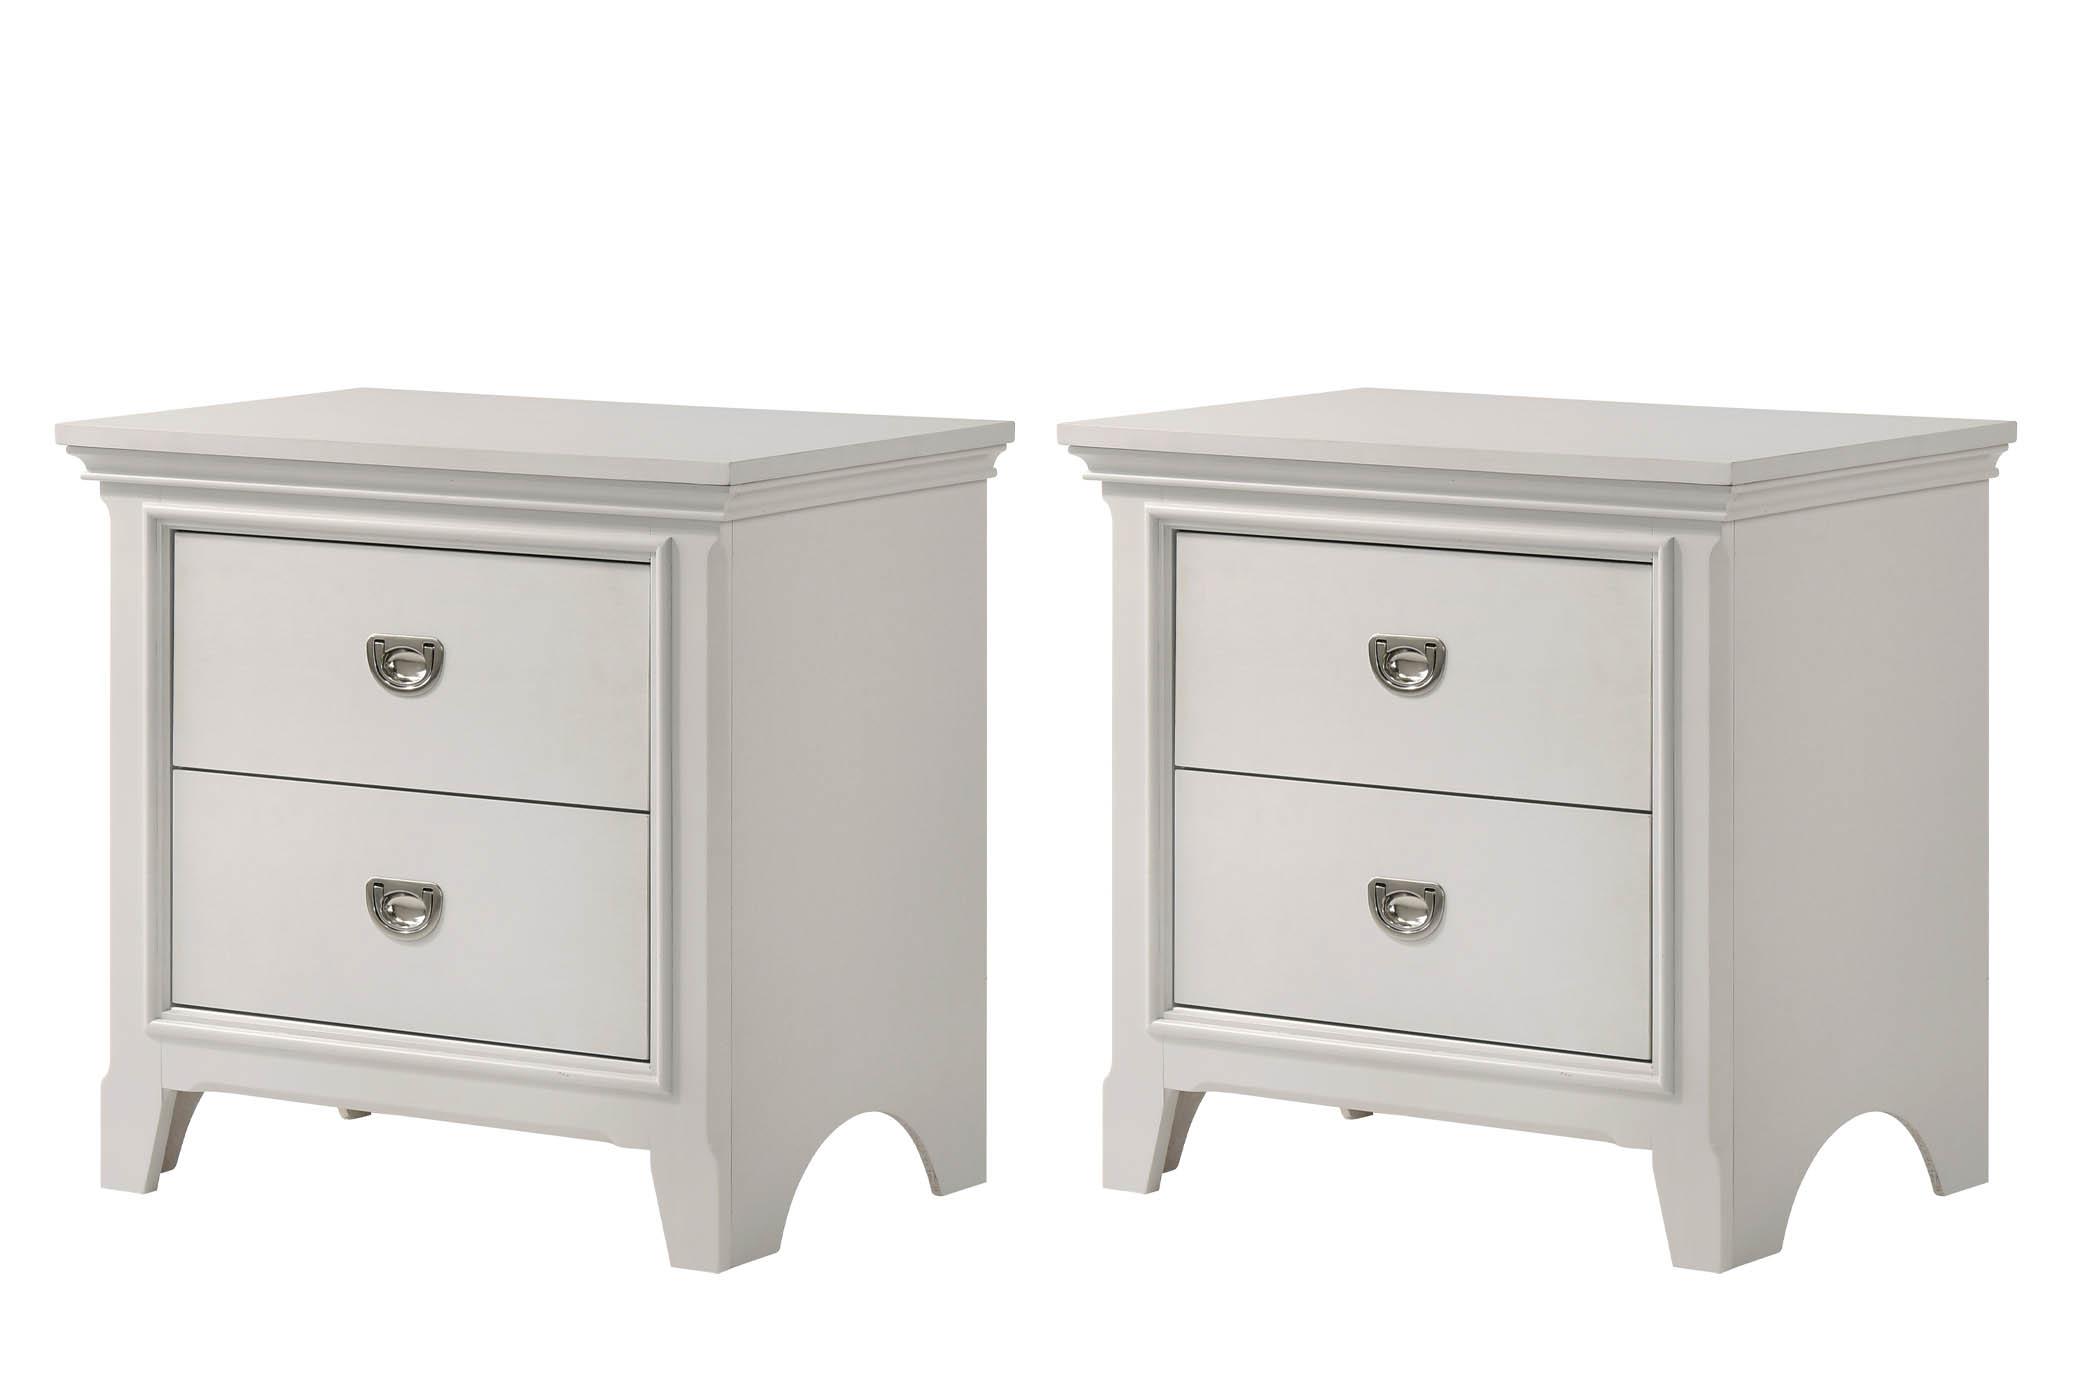 Modern, Transitional Nightstand Set MEADOW 200-120-Set 200-120-Set in Light Gray, White 